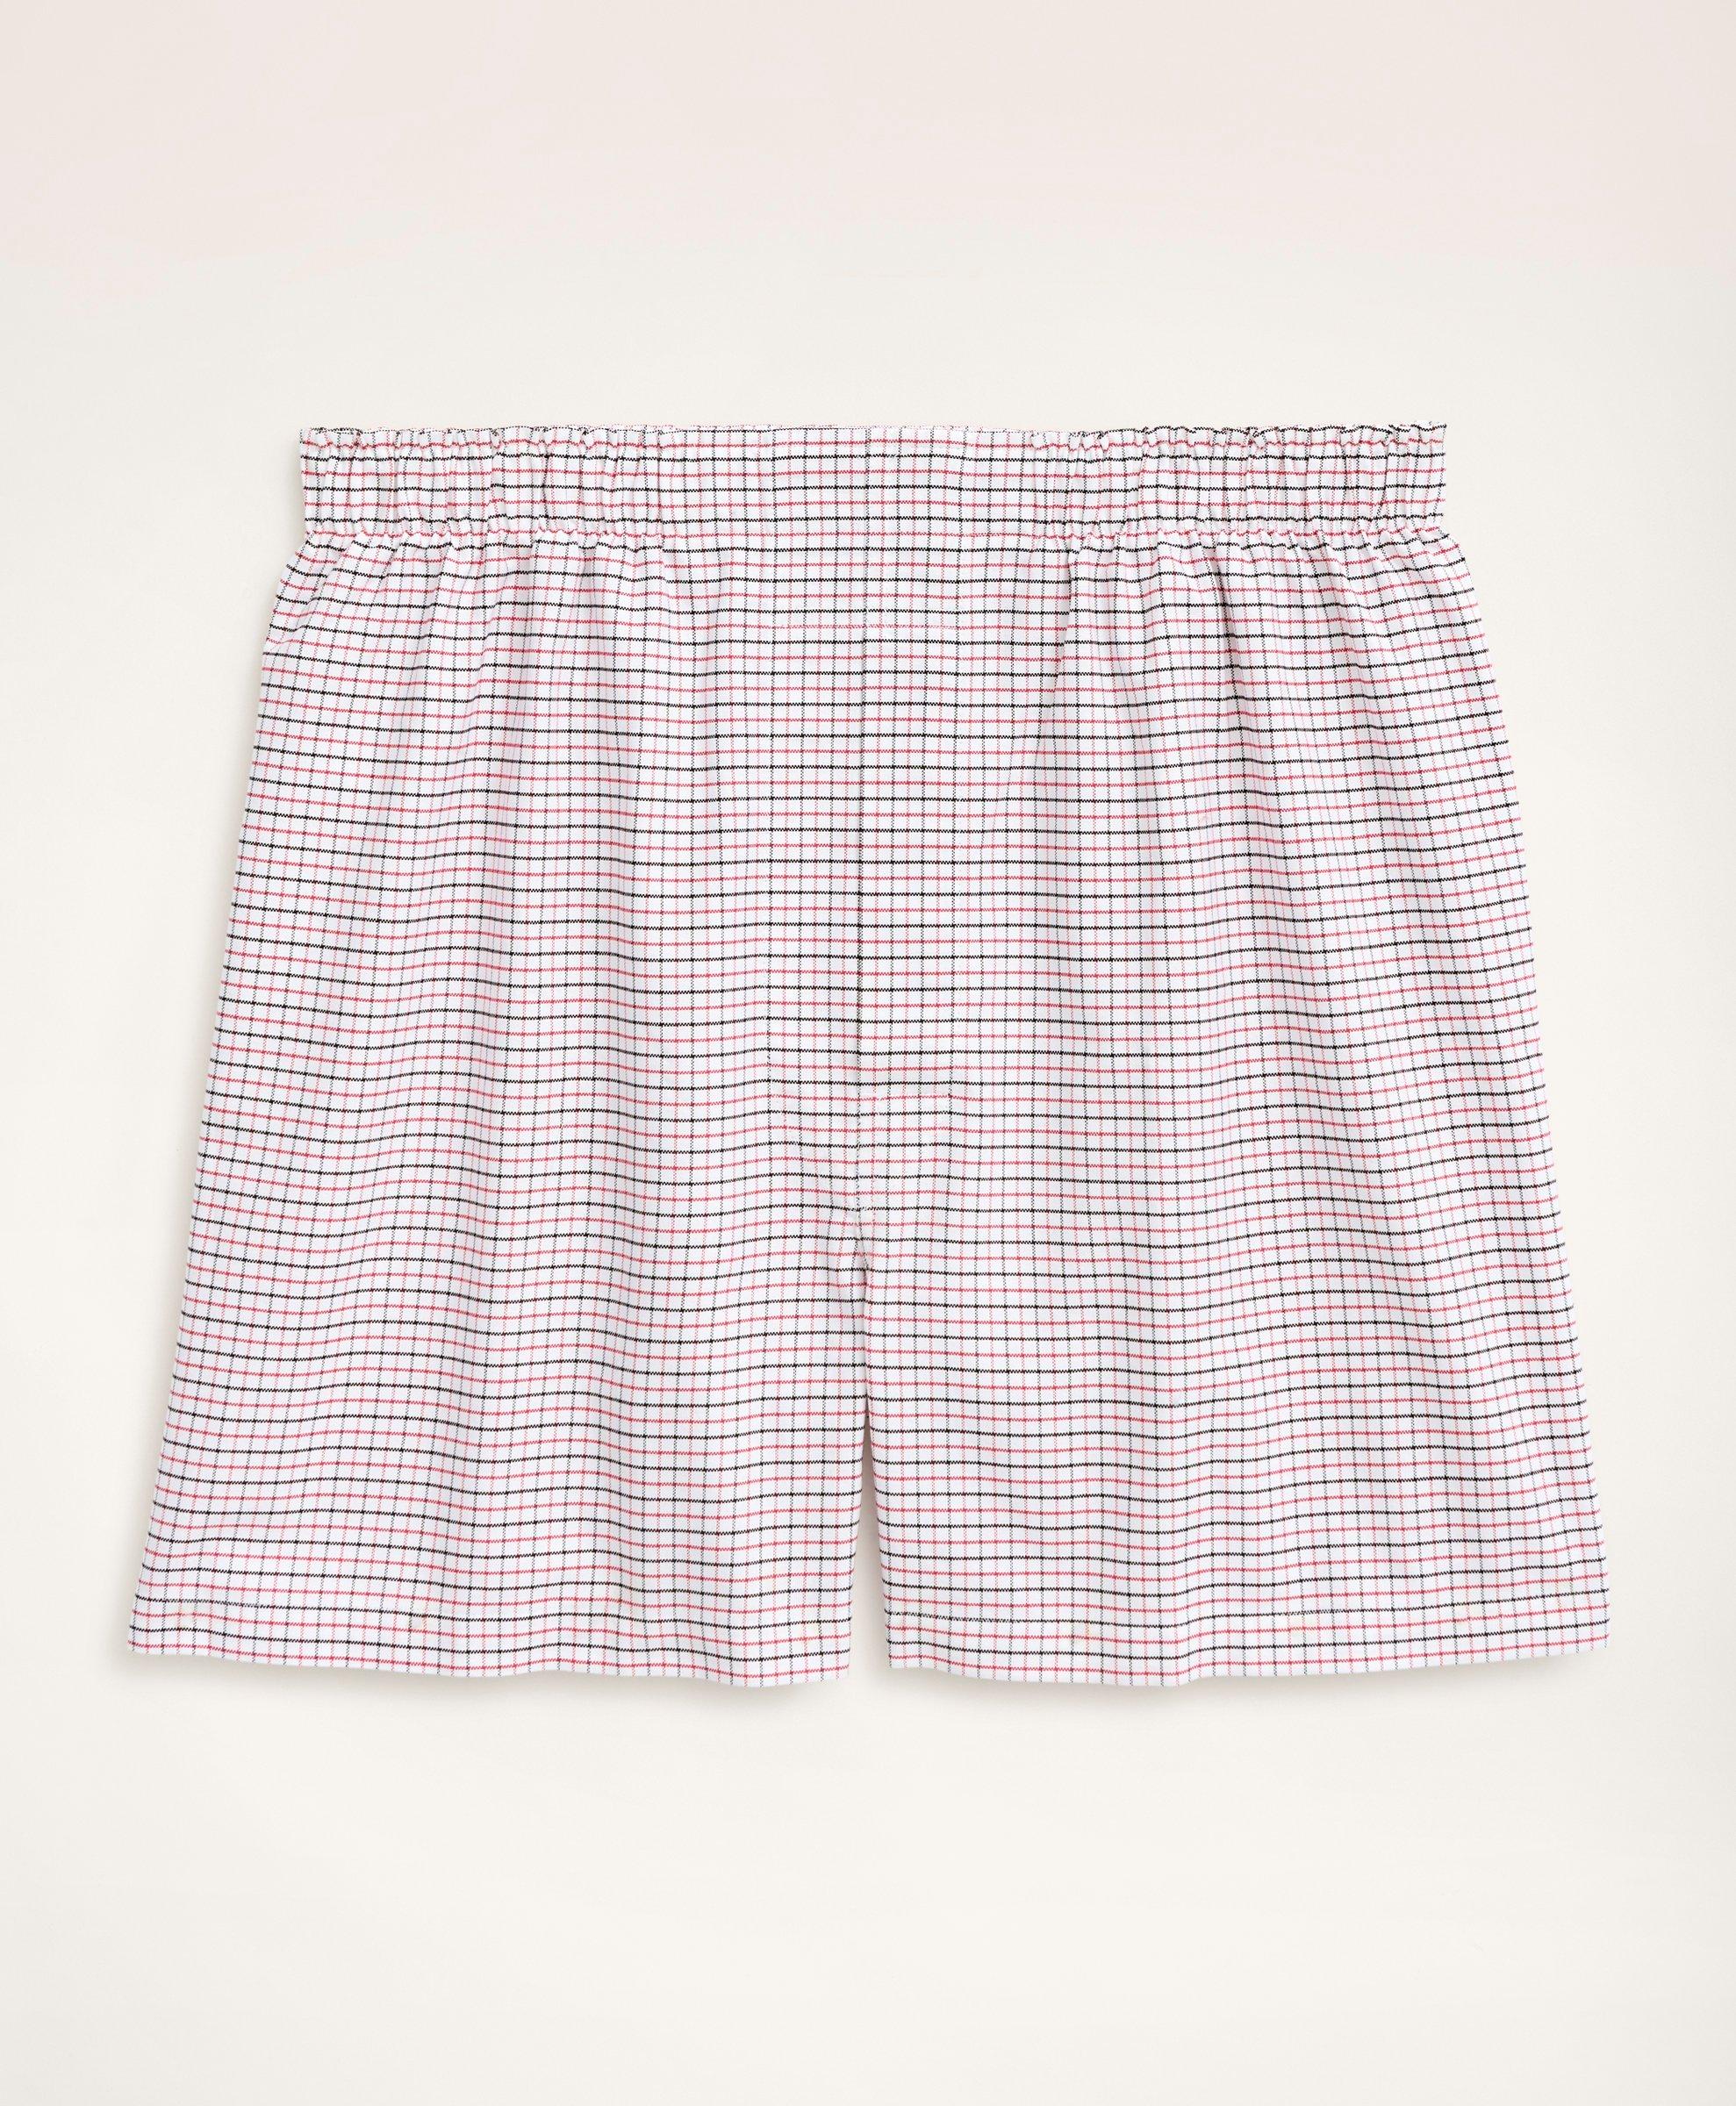 Cotton Oxford Tattersall Boxers, image 1